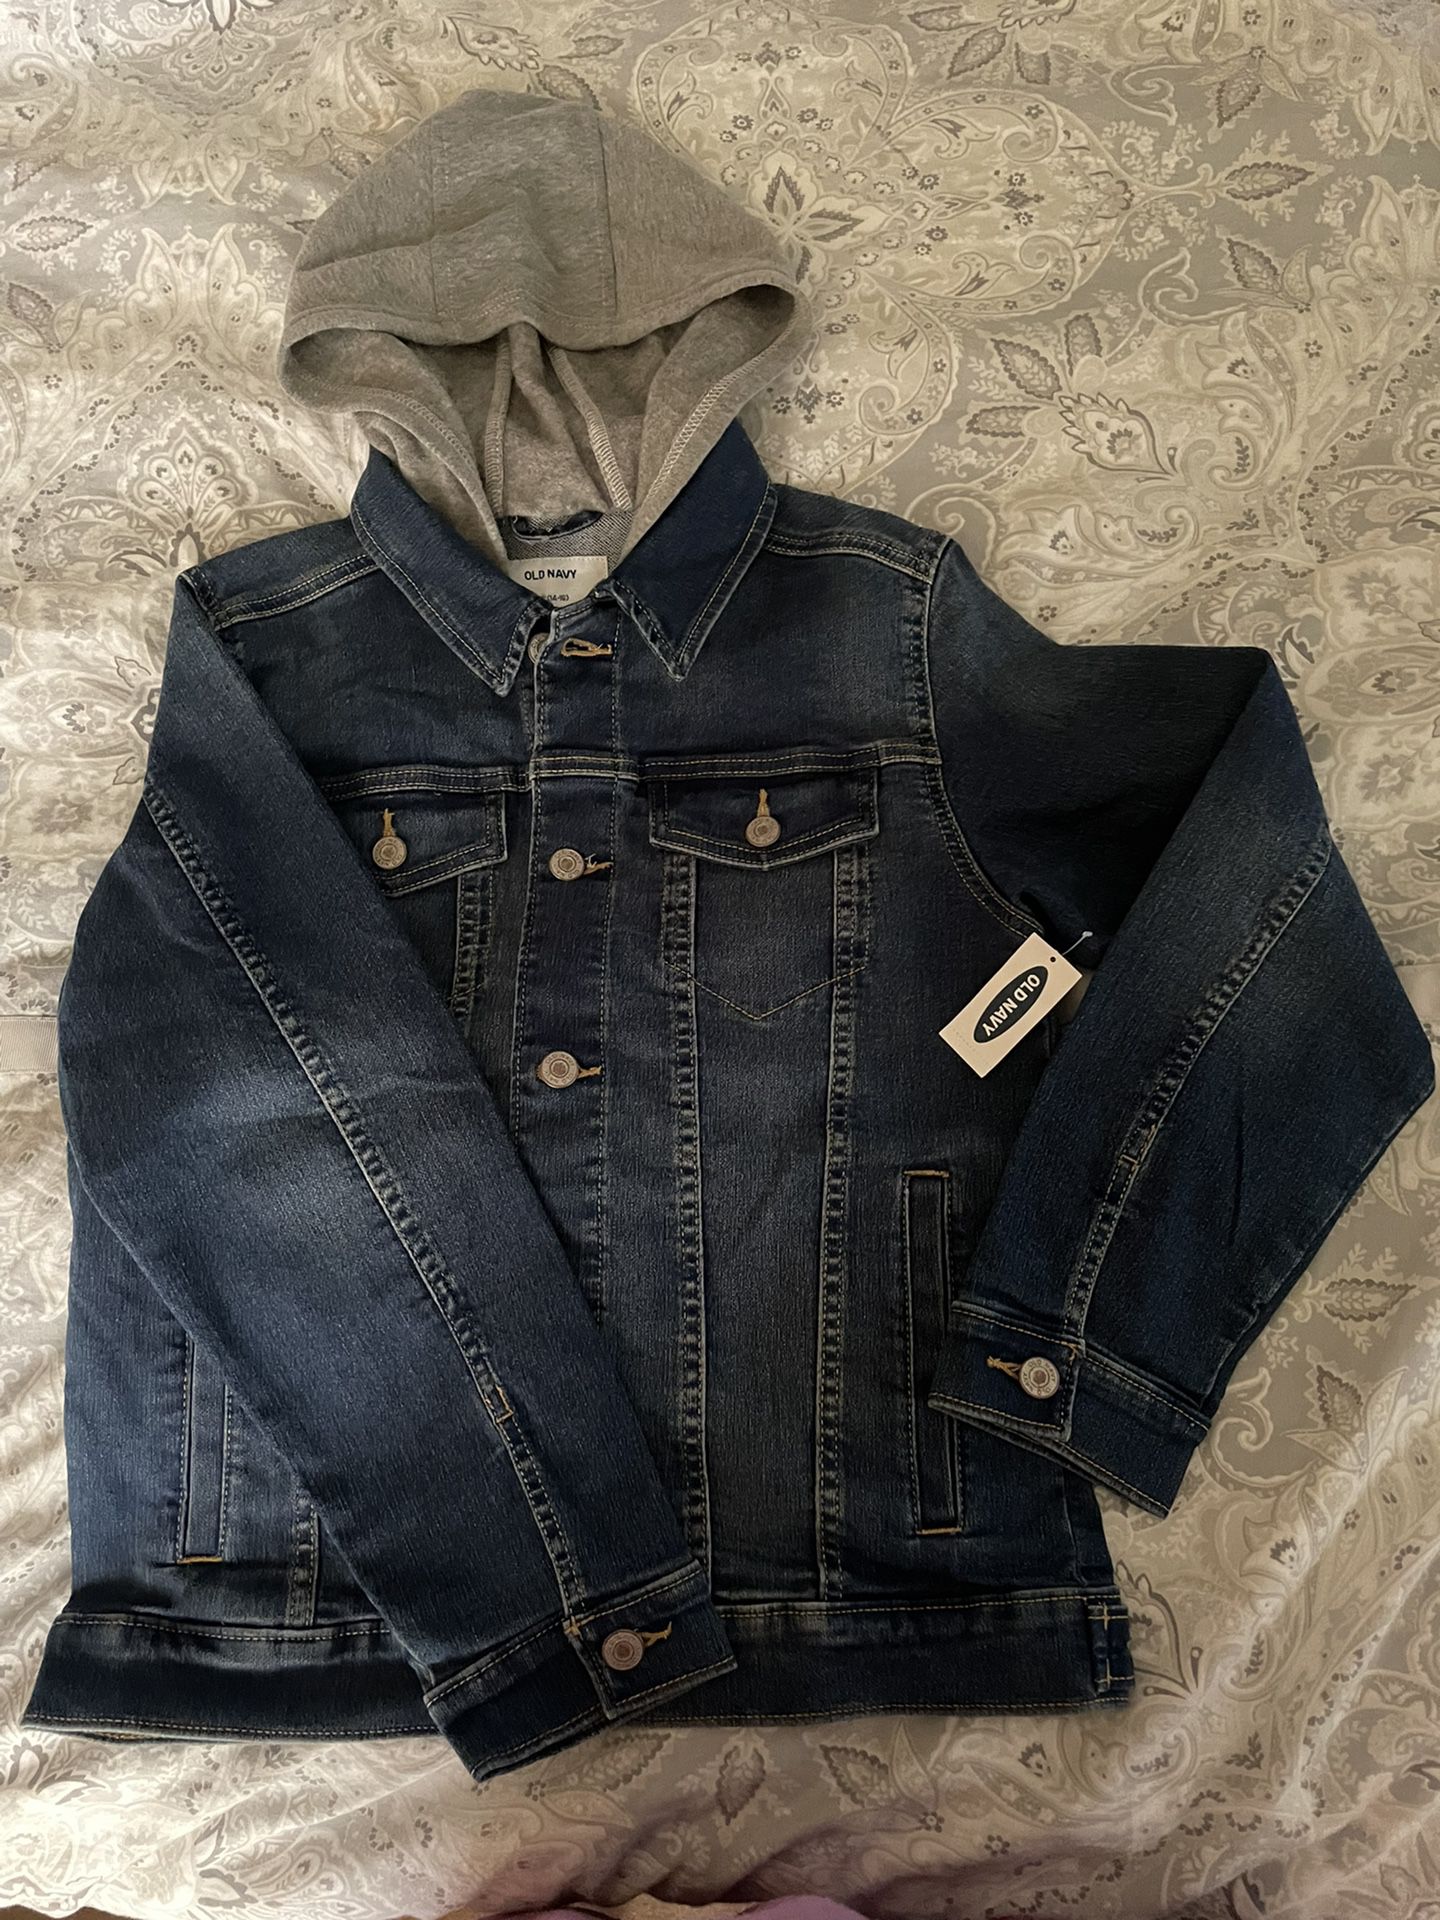 Boys Size 14-16 Old Navy Denim Hooded Jacket (Brand New With Tags)